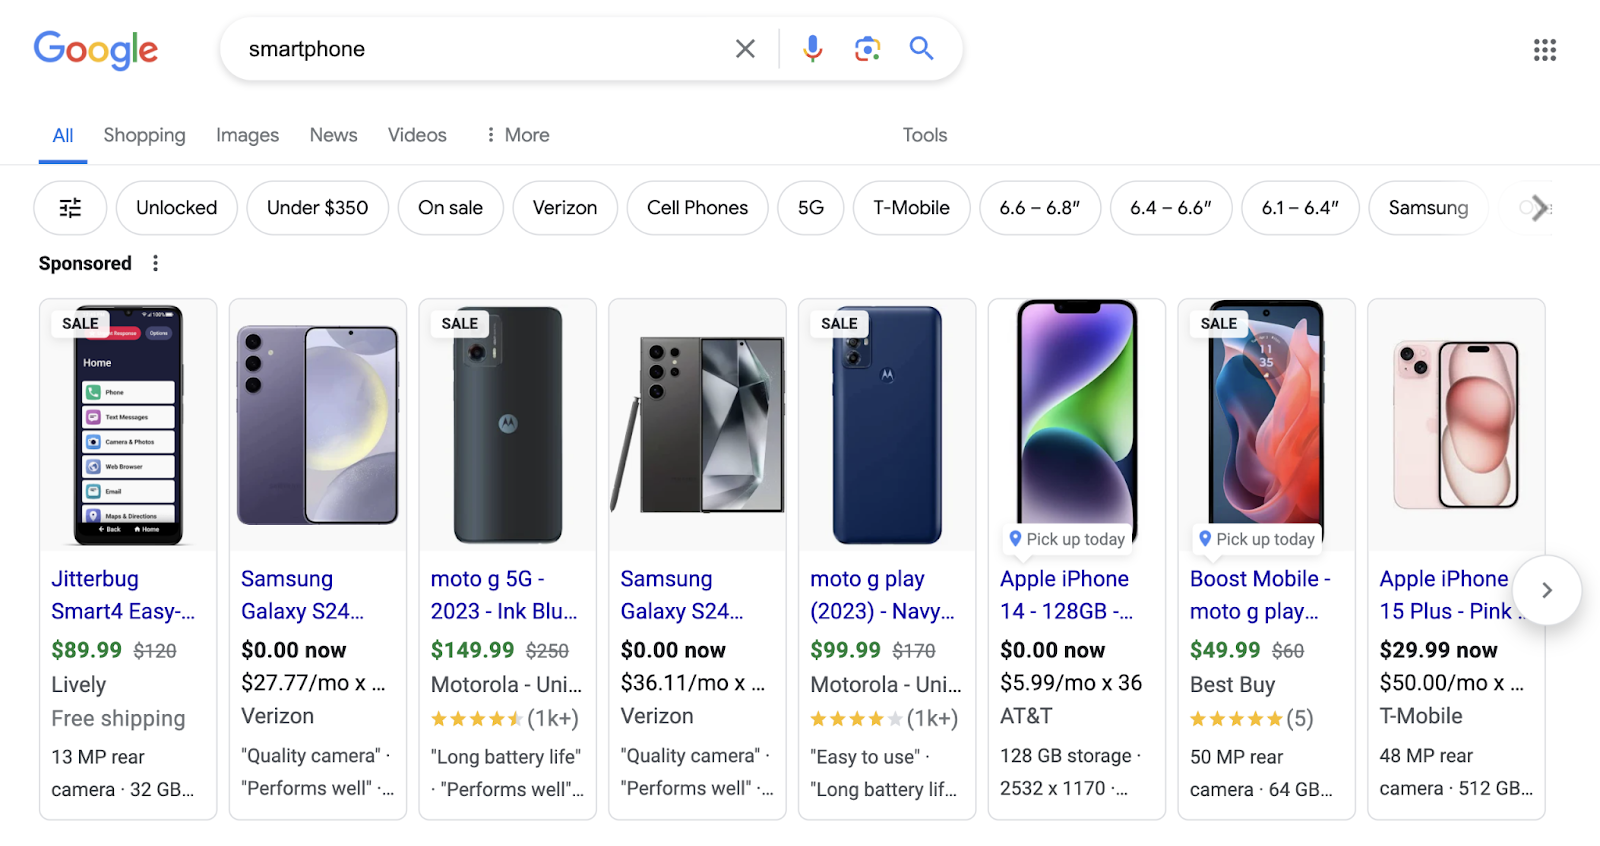 shopping ads for smartphone appear at the top of the serp showing different models from different retailers